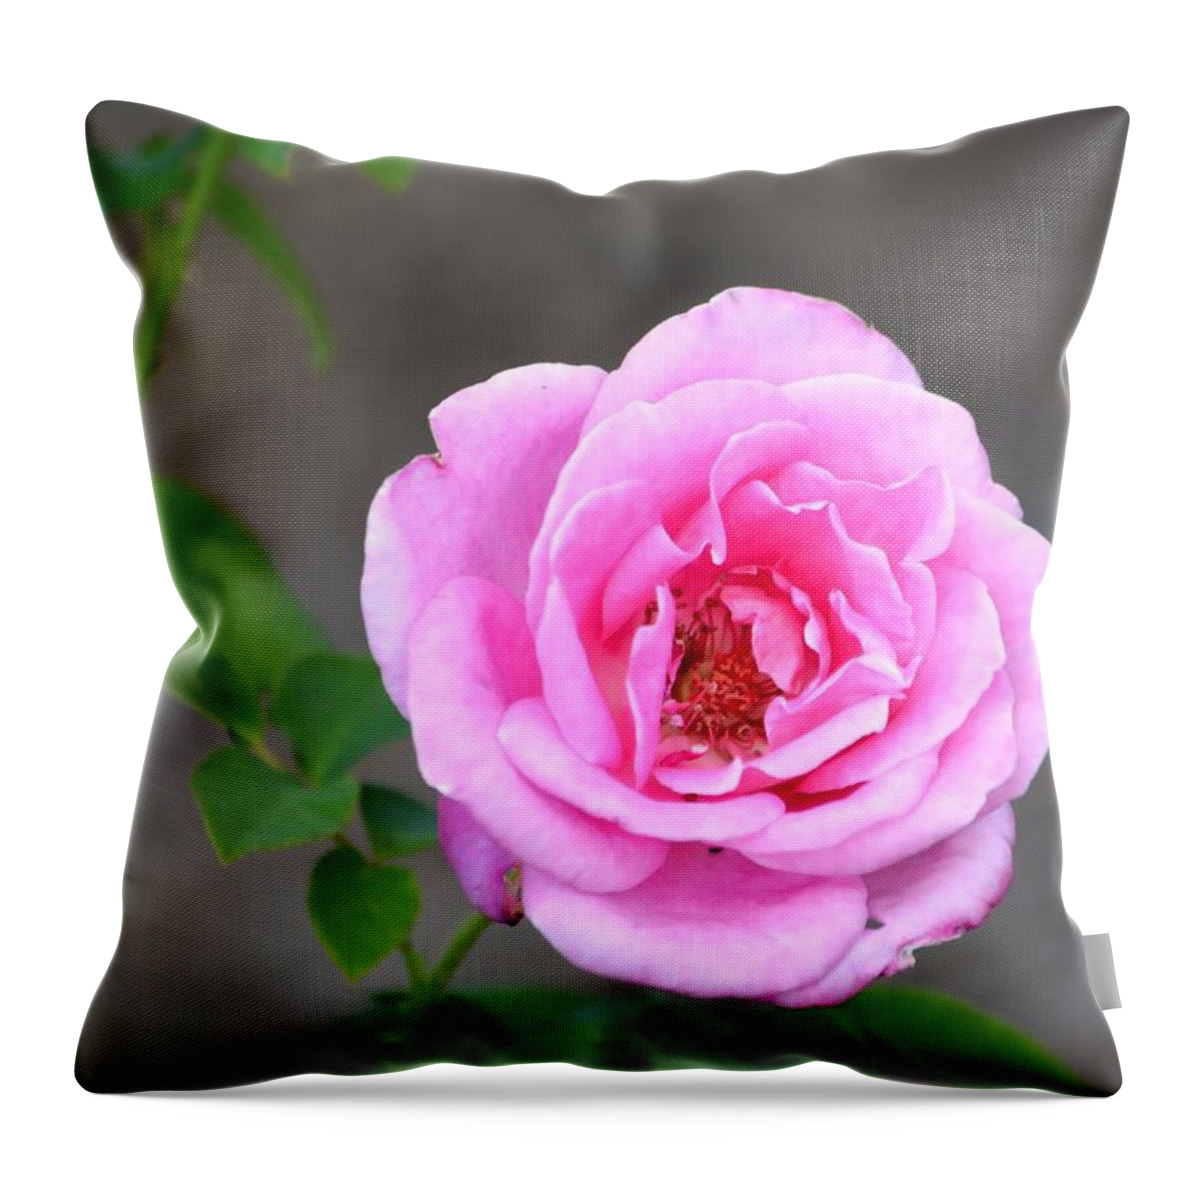 Rose Throw Pillow featuring the photograph Shades Of Pink by Deena Stoddard